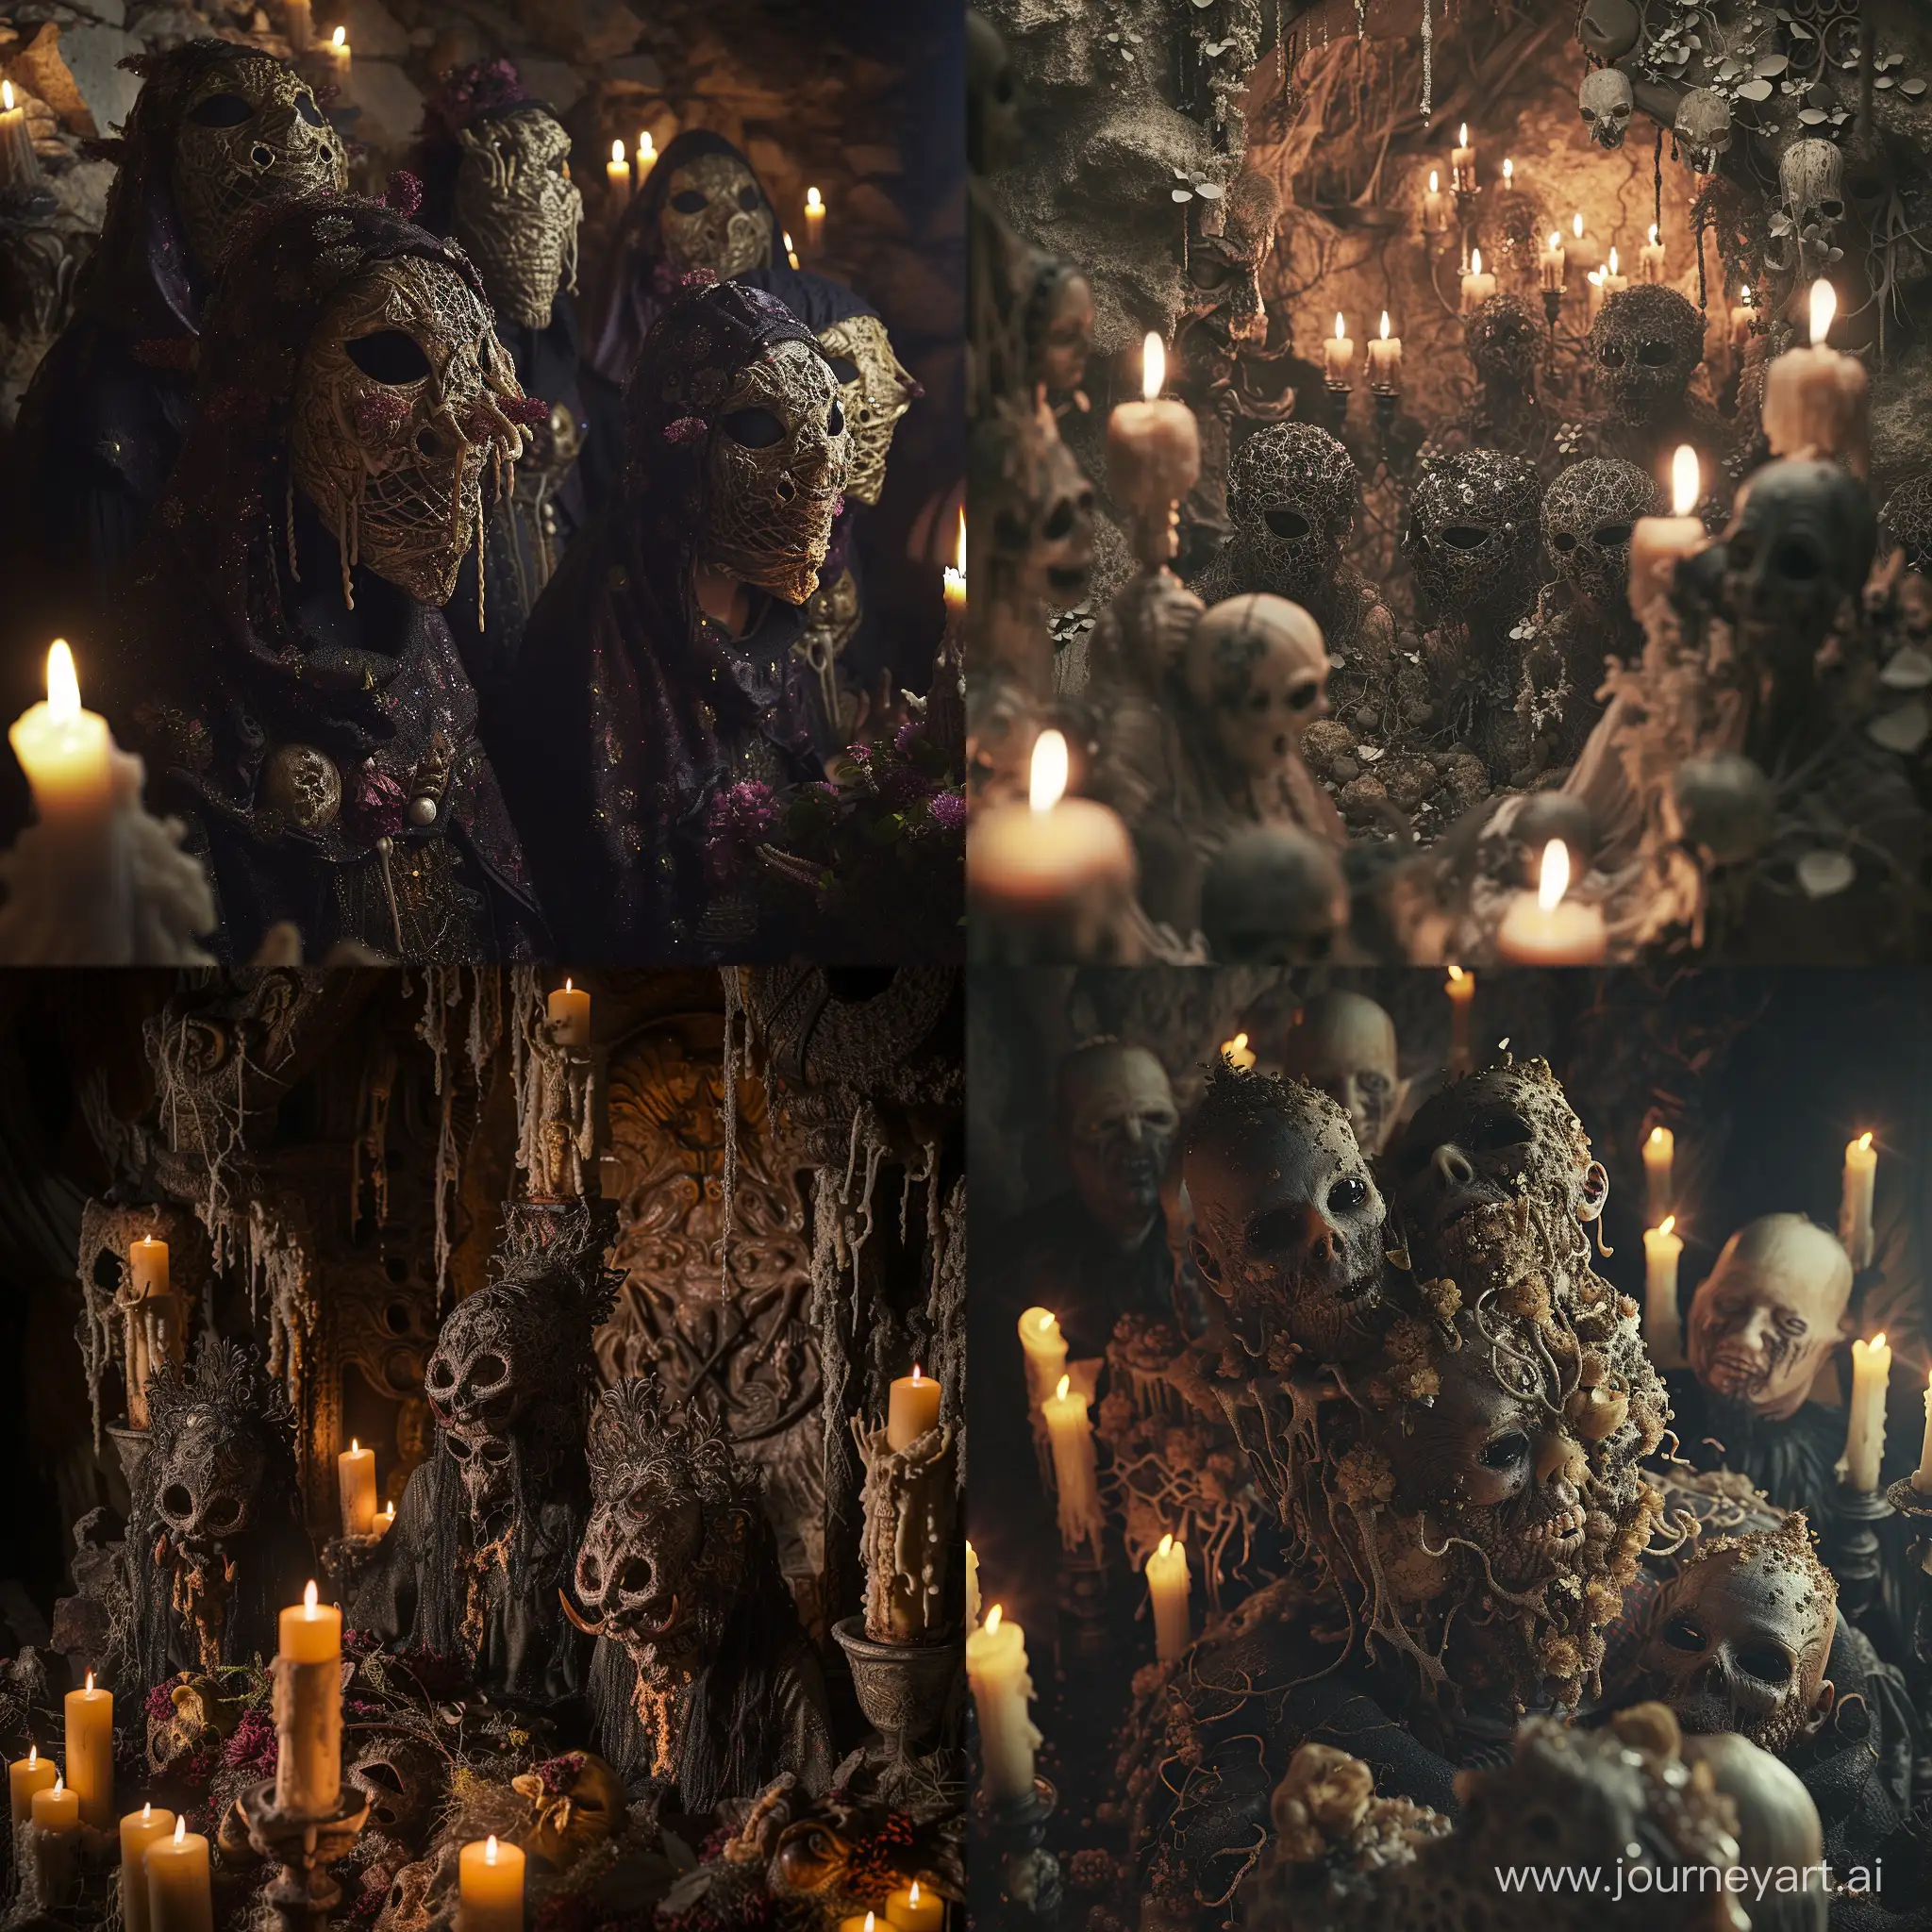 A photography of an Occult Odyssey that captures the essence of a dark and grudgy scene. The subject is a group of figures, with faces covered in intricate masks, performing a ritualistic ceremony surrounded by candles and shadows. The scene is intensely hyper - realistic, with every detail of the masks and the decorations capturing the essence of the occult. The camera angle is up - close and personal, drawing attention to the intensity of the scene, while the focus is sharp to bring out every detail of the masks and the individuals.